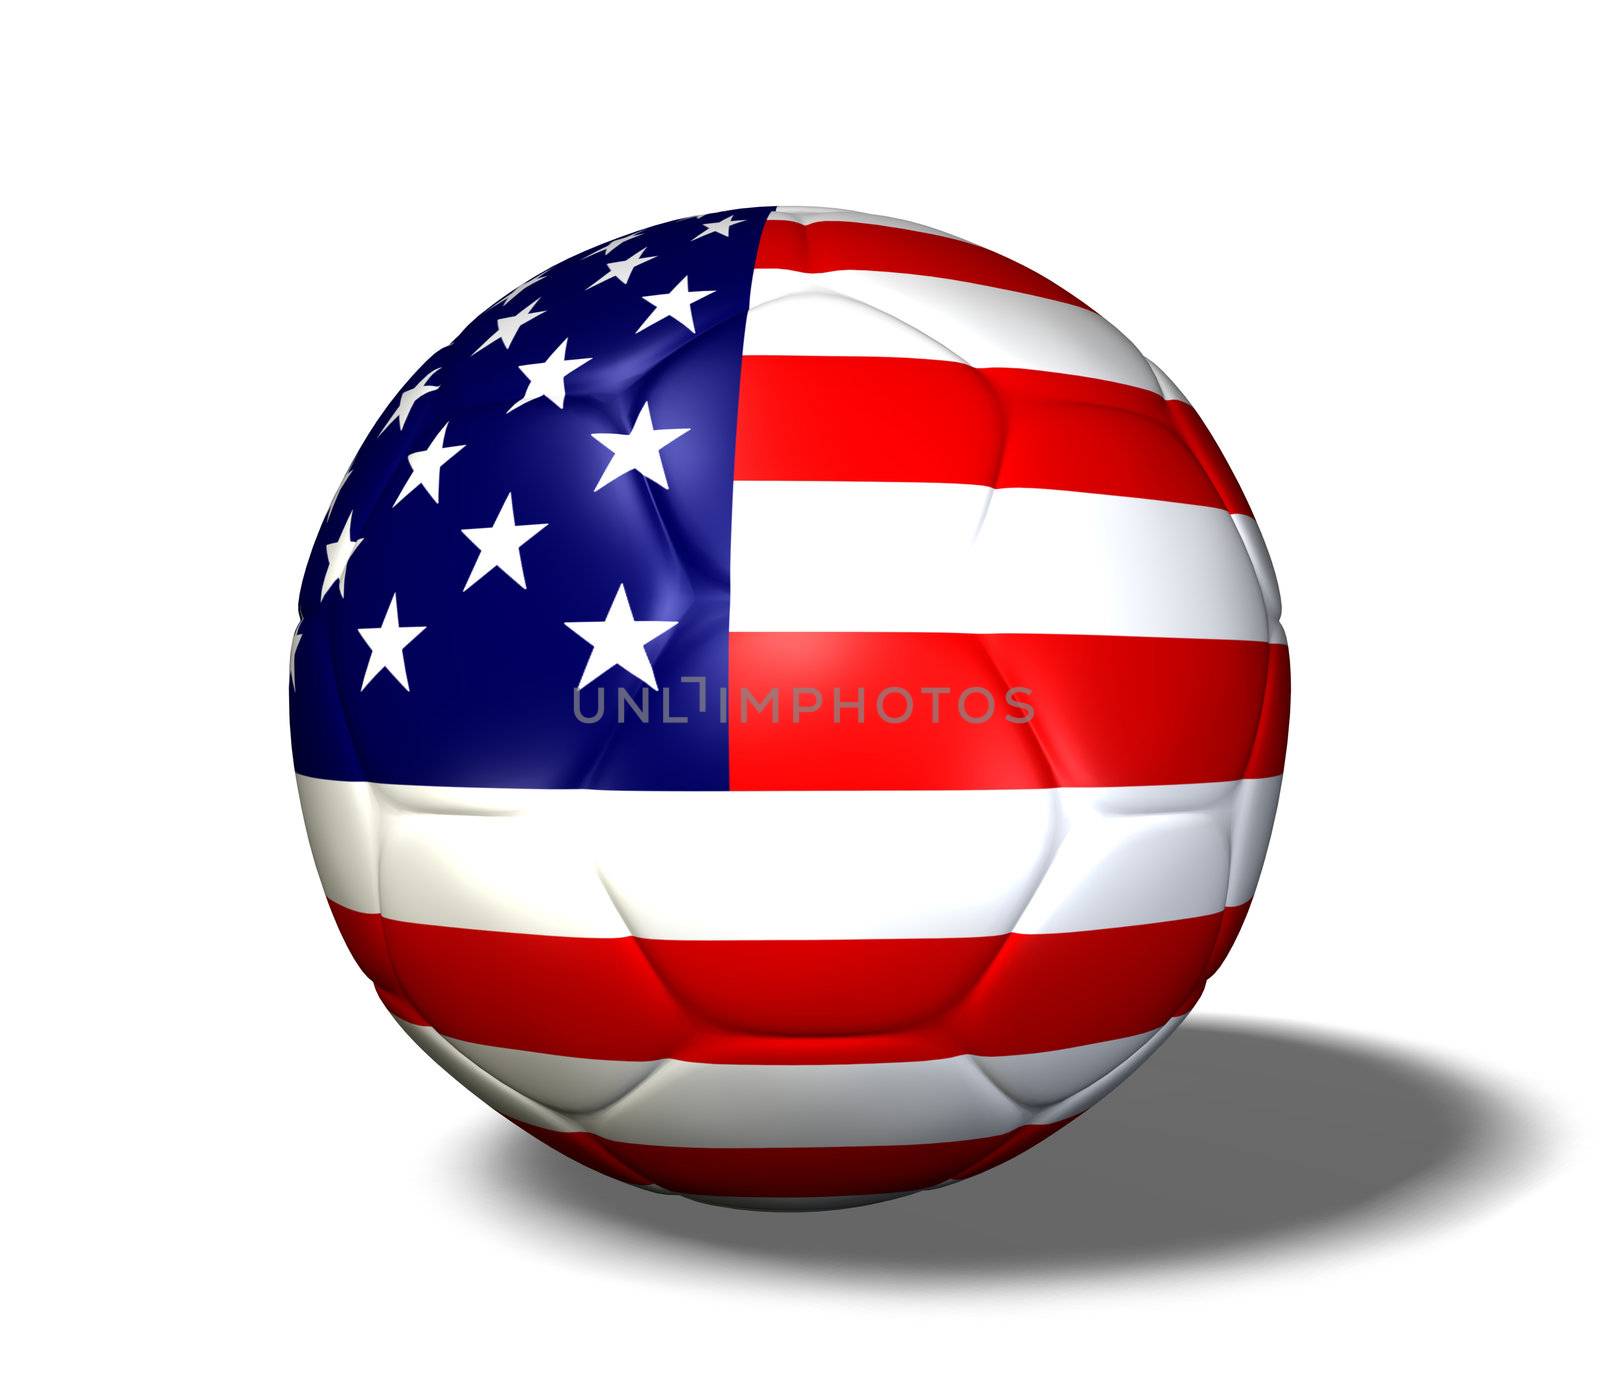 Image of a soccer ball with the flag from the United States of America.